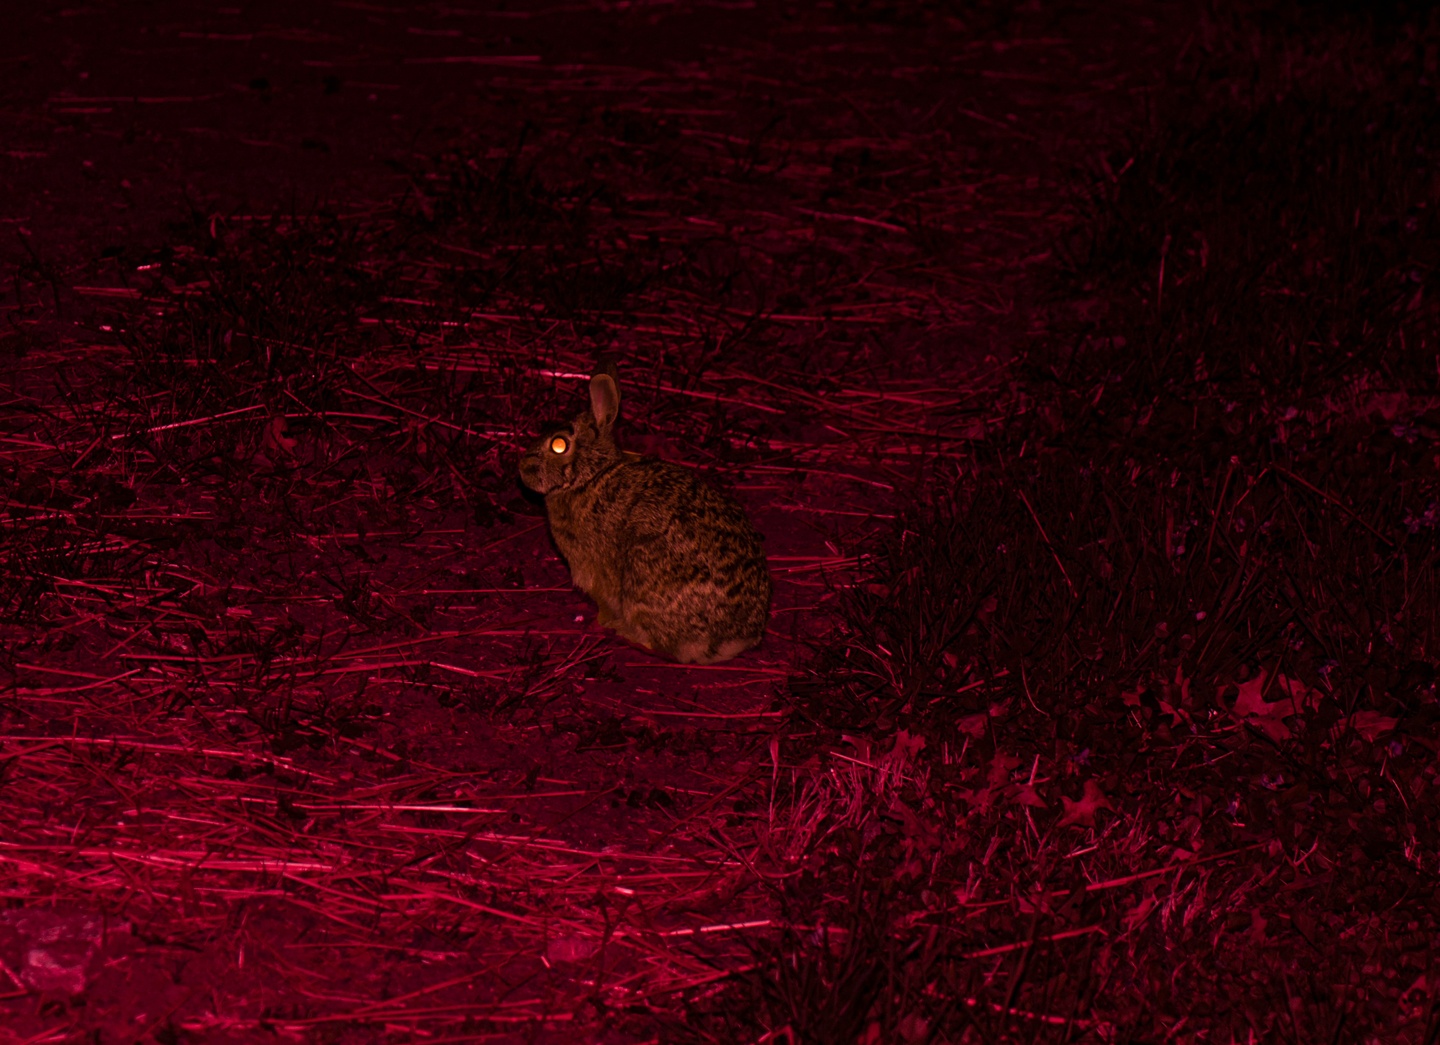 Wild rabbit sitting on a tract of grass photographed at night with a red light, causing its eye to glow.